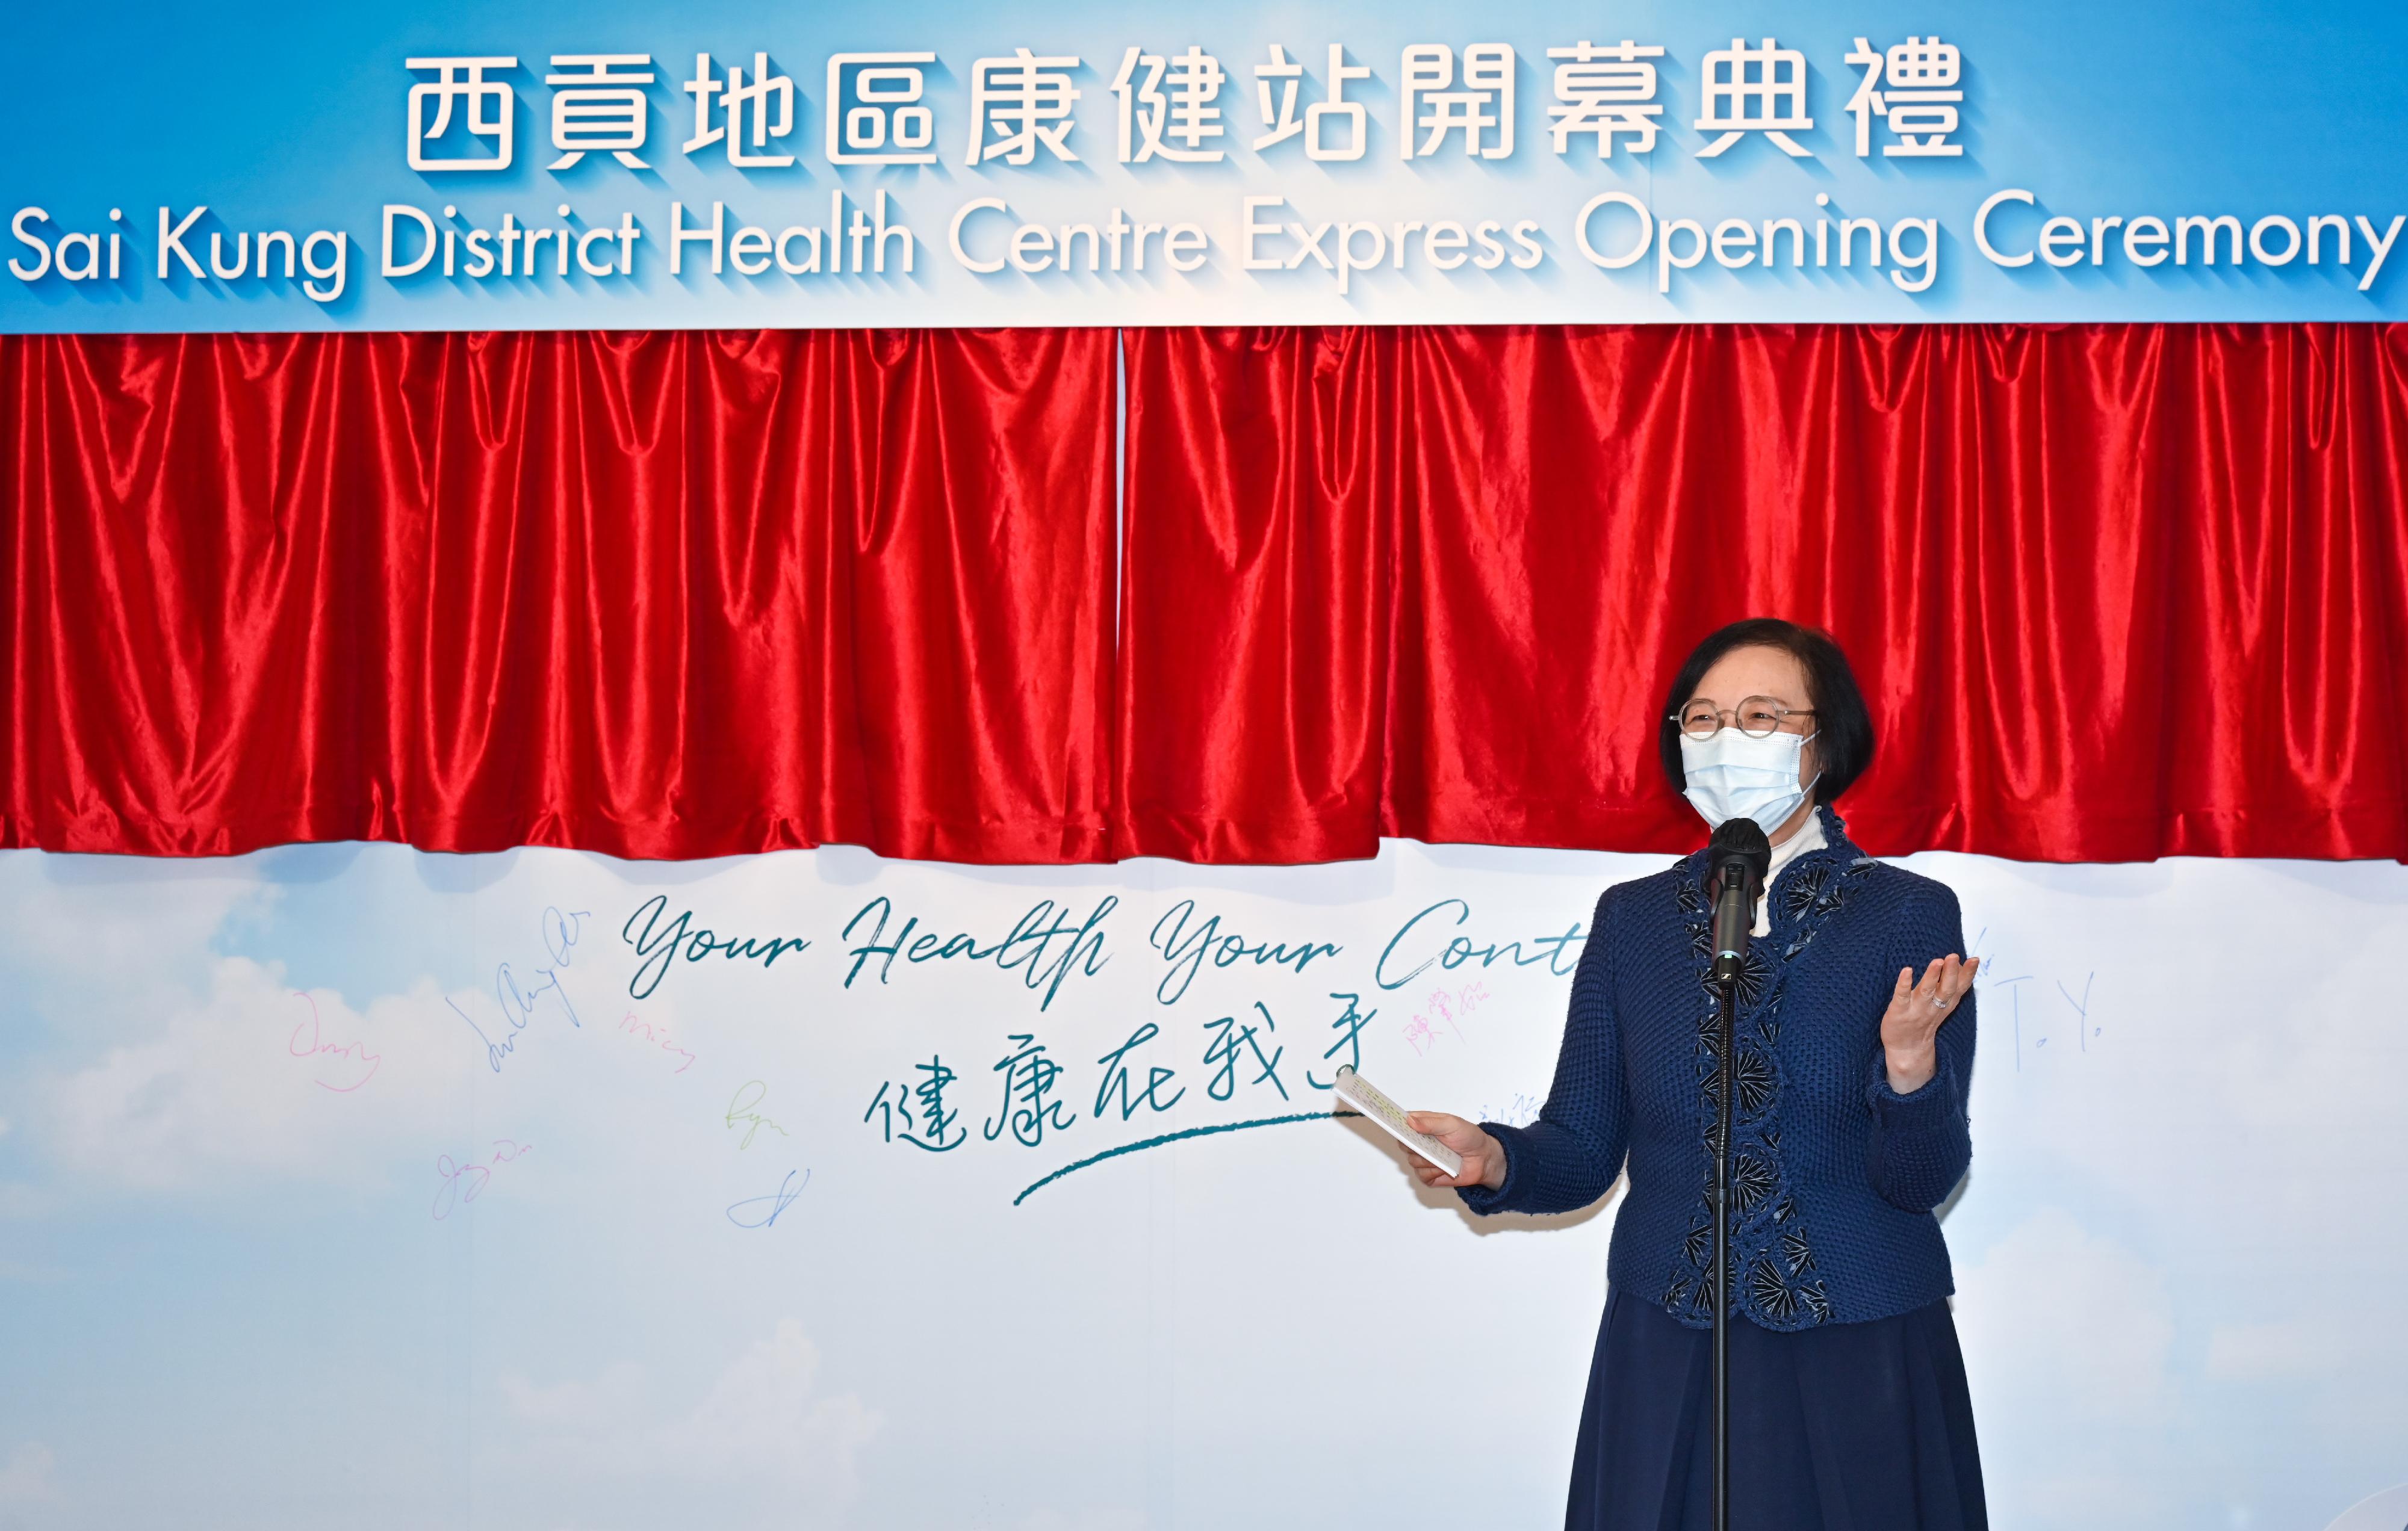 The Secretary for Food and Health, Professor Sophia Chan, delivers a speech at the opening ceremony of the Sai Kung District Health Centre Express today (December 9).